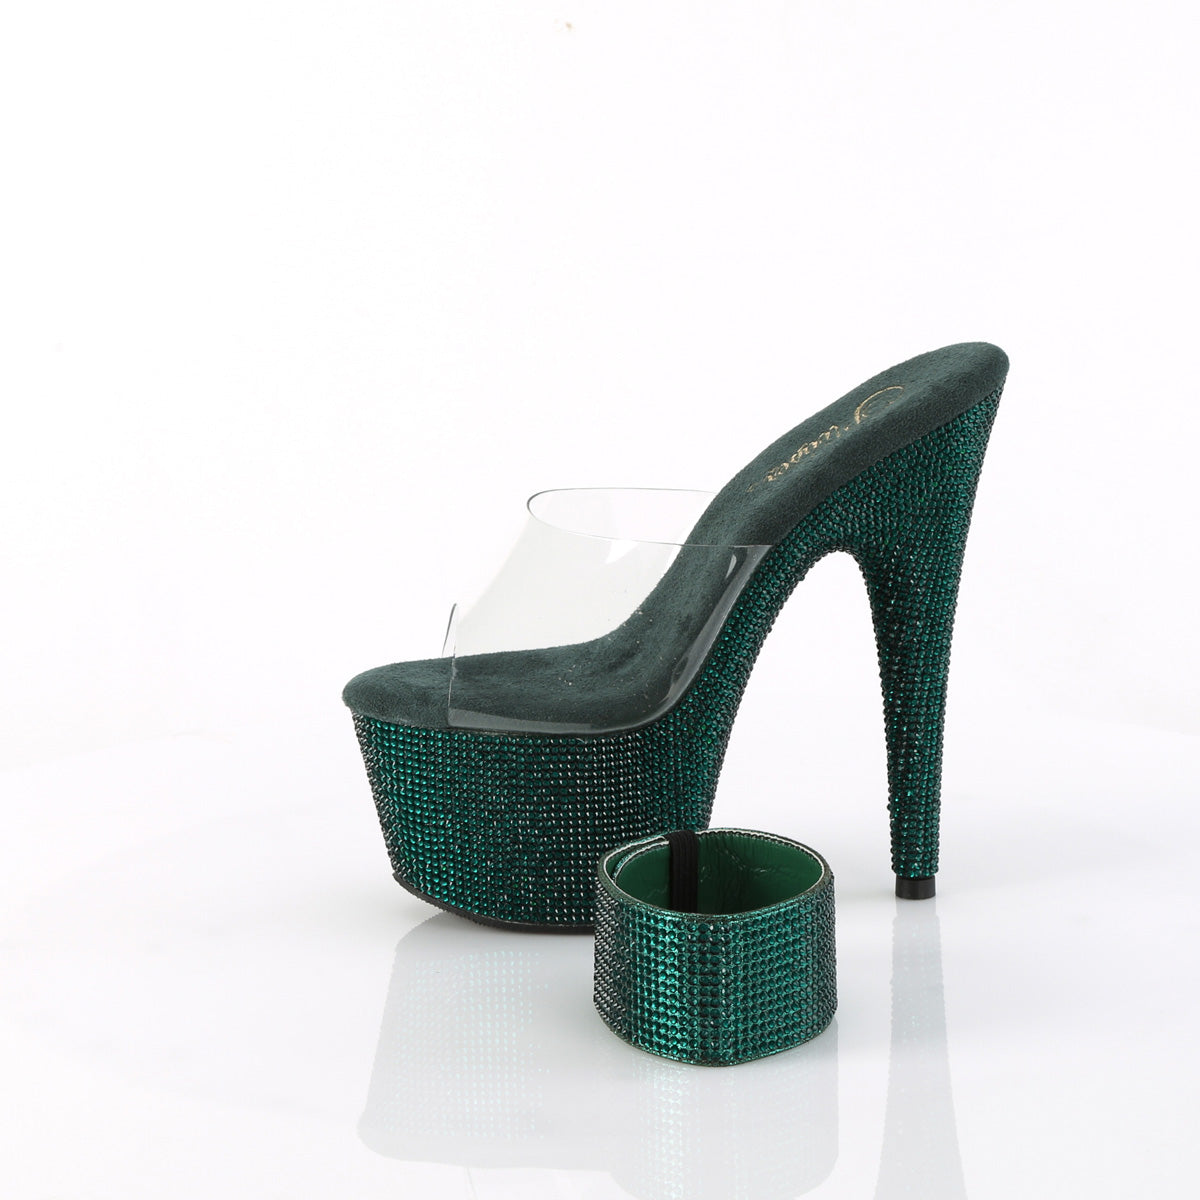 BEJEWELED-712RS Pleaser Emerald Bling Pole Dancing Shoes